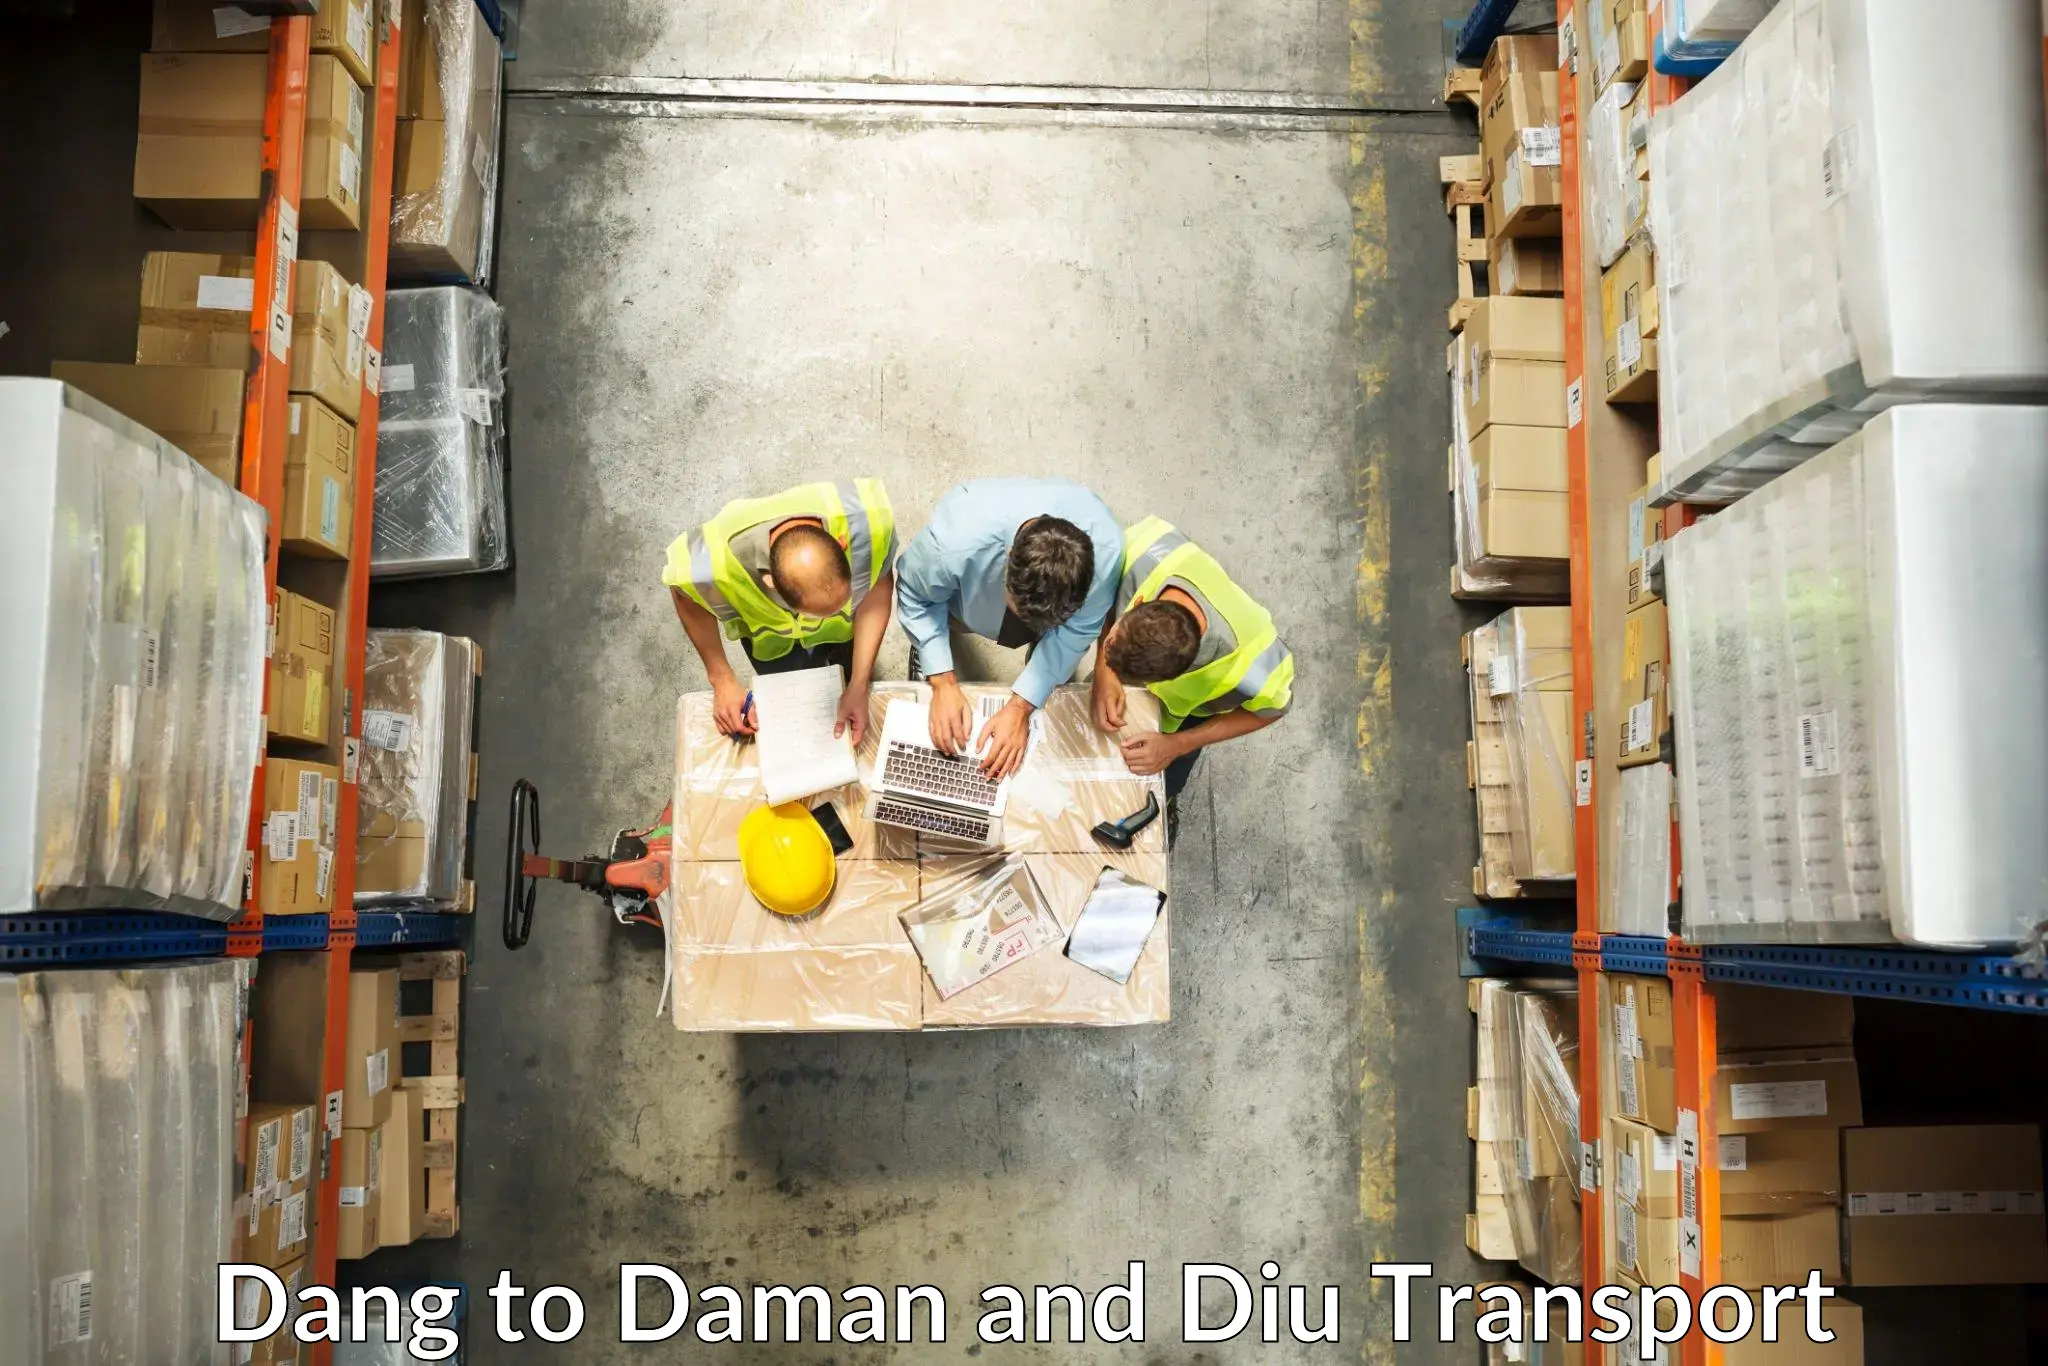 Part load transport service in India Dang to Daman and Diu